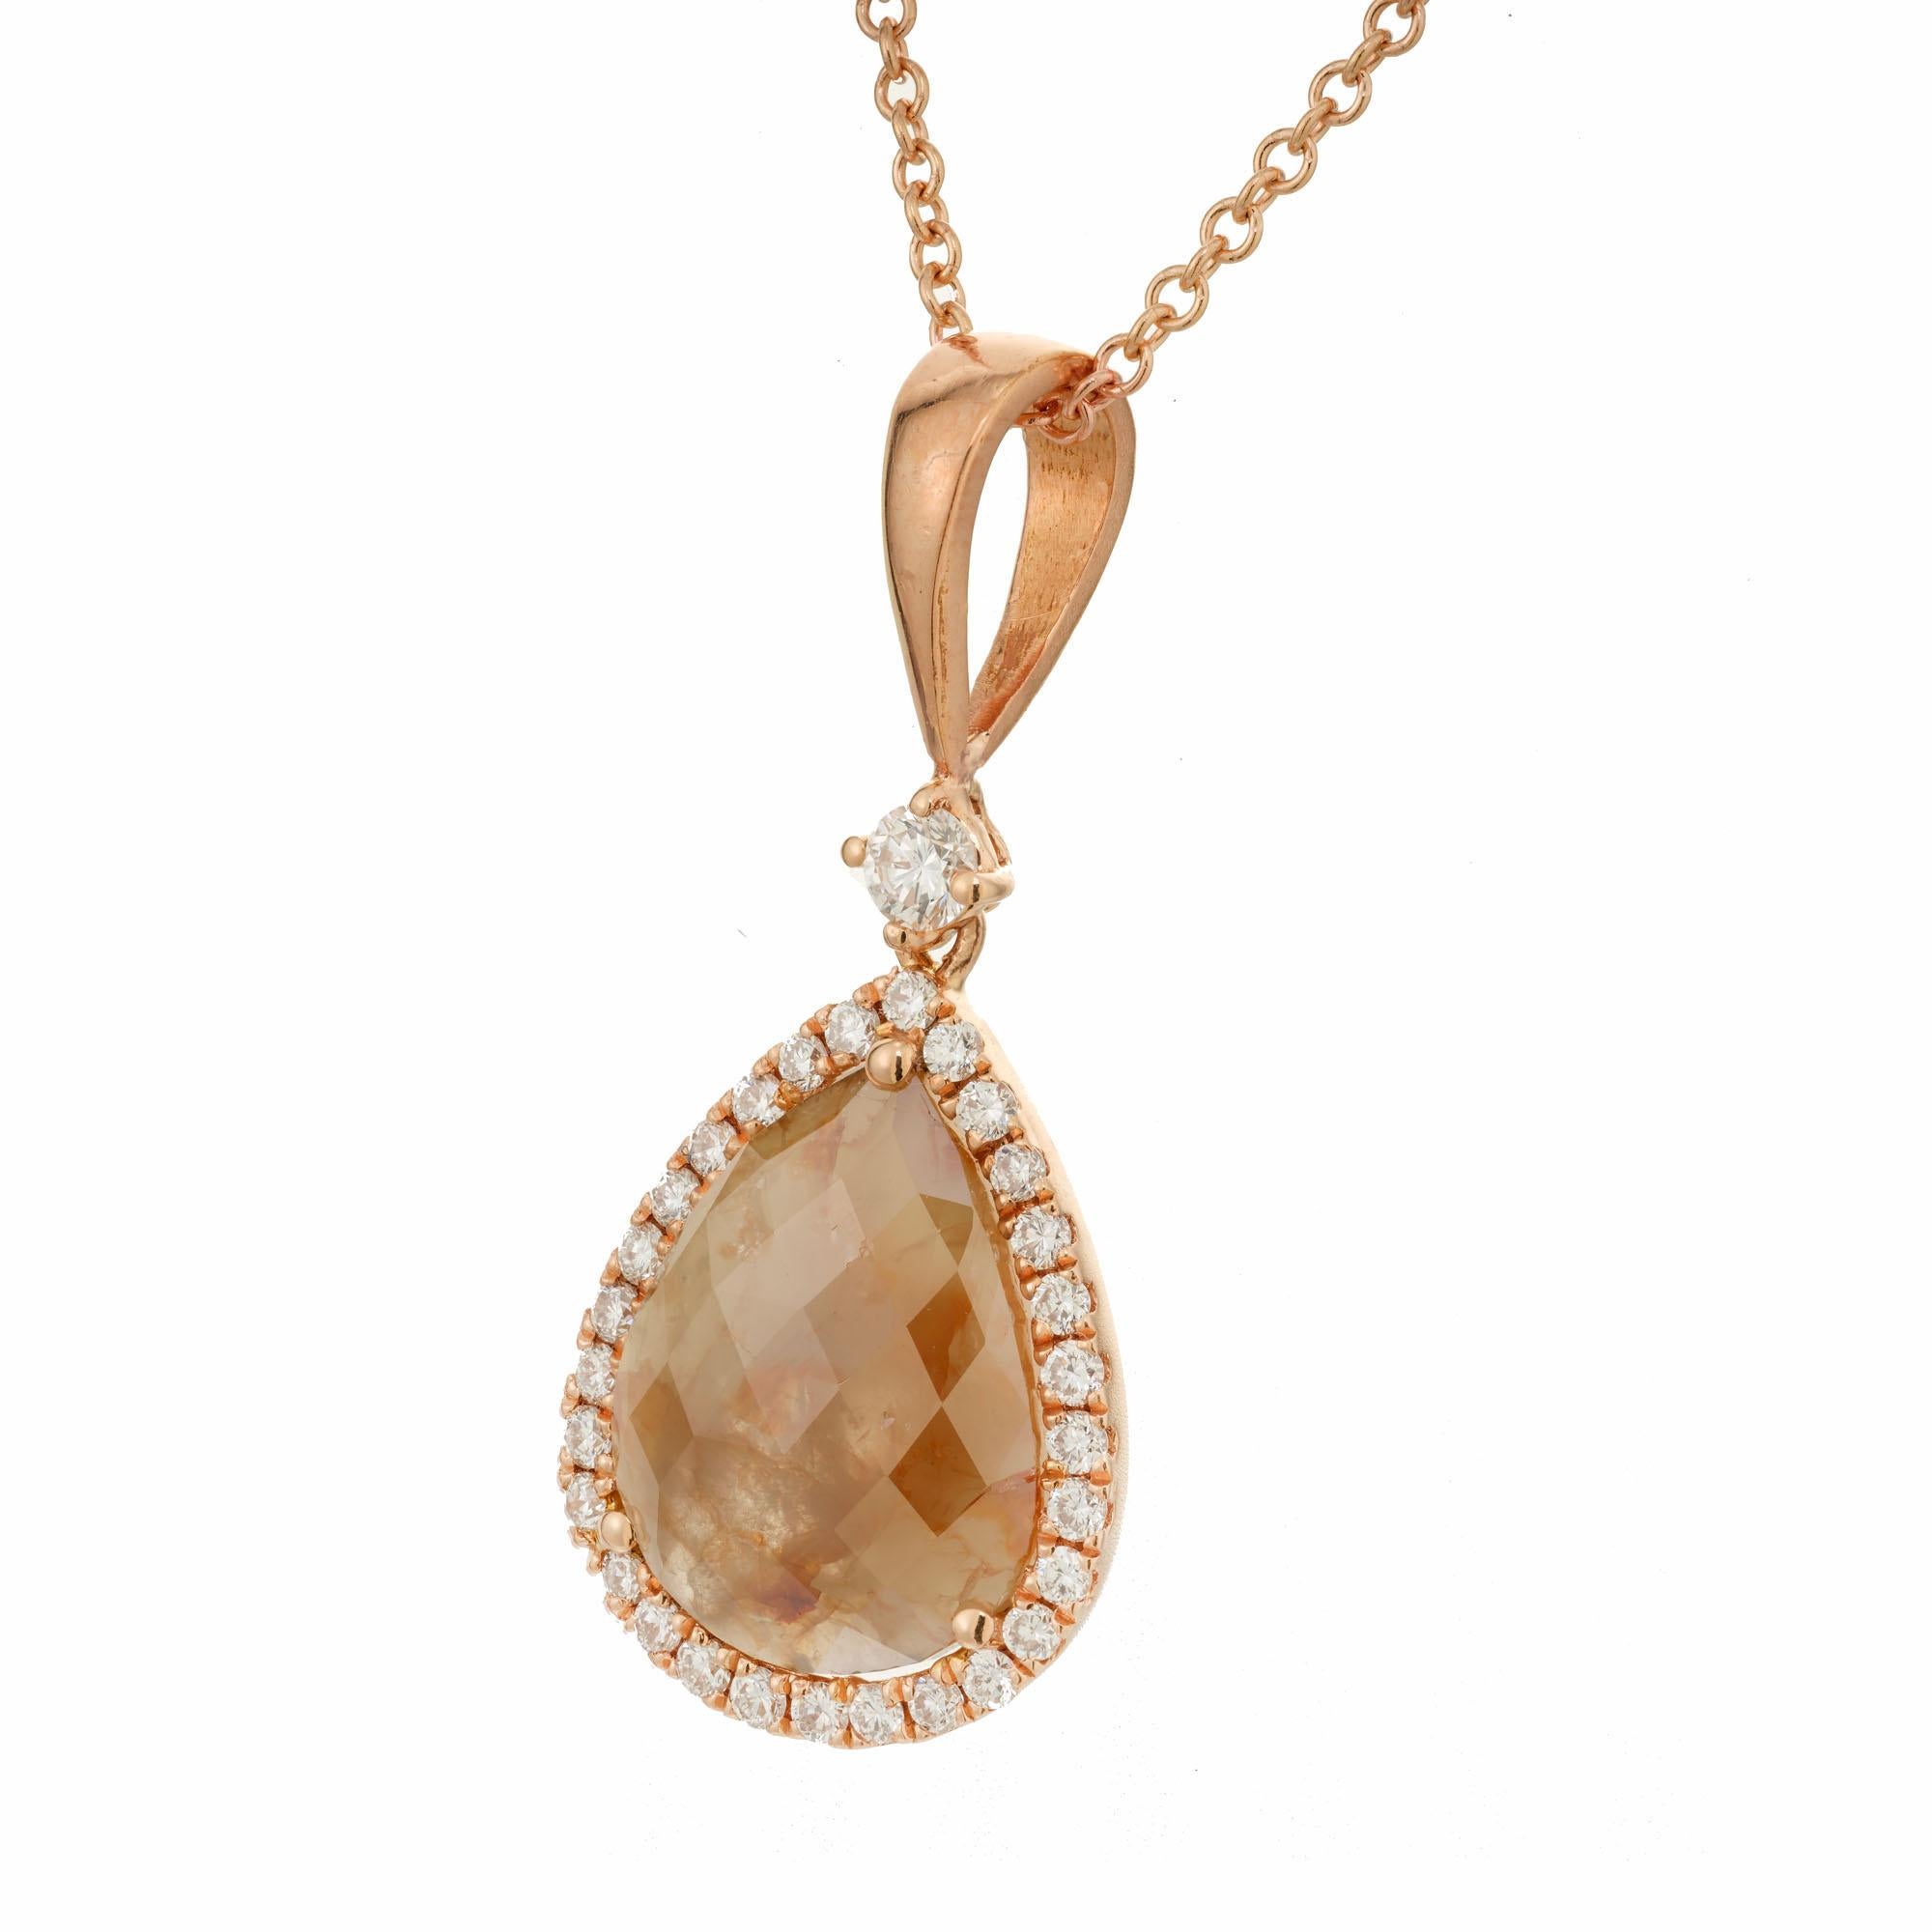 Natural pink brown color diamond slice pendant necklace. 1 pear slice pink/brown diamond slice with a halo of round white diamonds, accented with one round diamond on the bail.  The 16 inch chain is 18k rose gold and the pendant is 14k rose gold